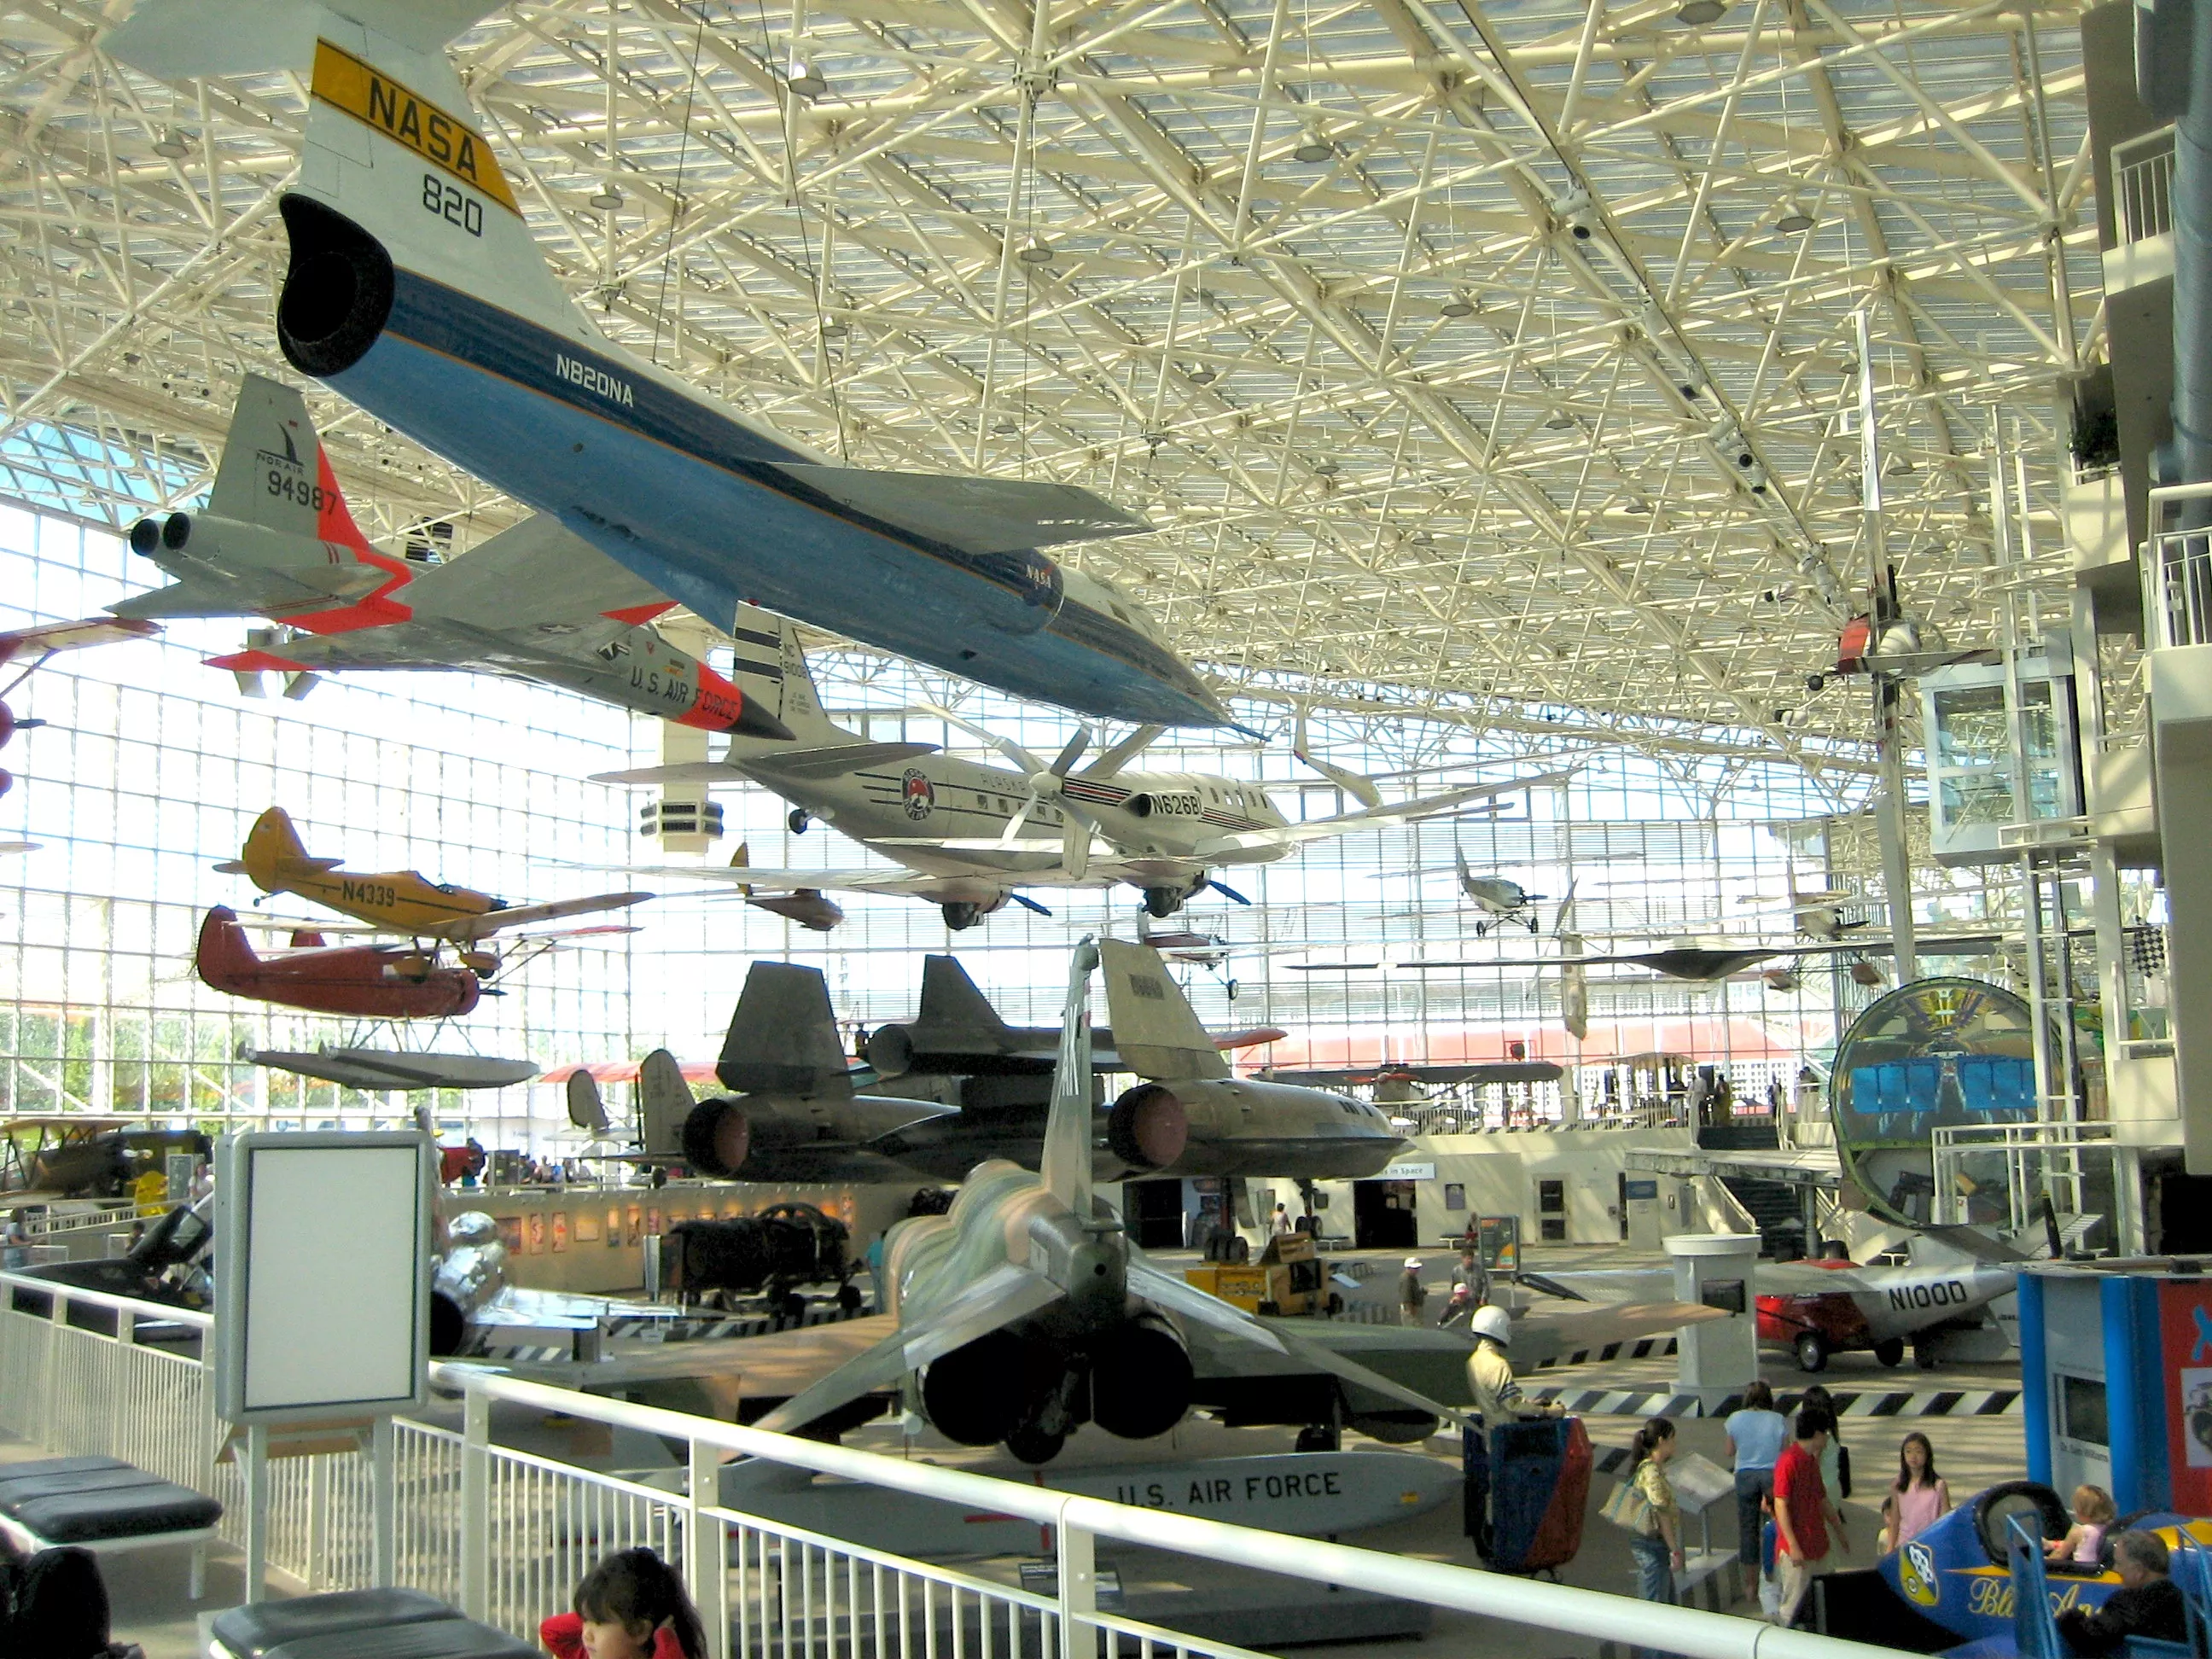 The Museum of Flight in USA, North America | Museums - Rated 4.2